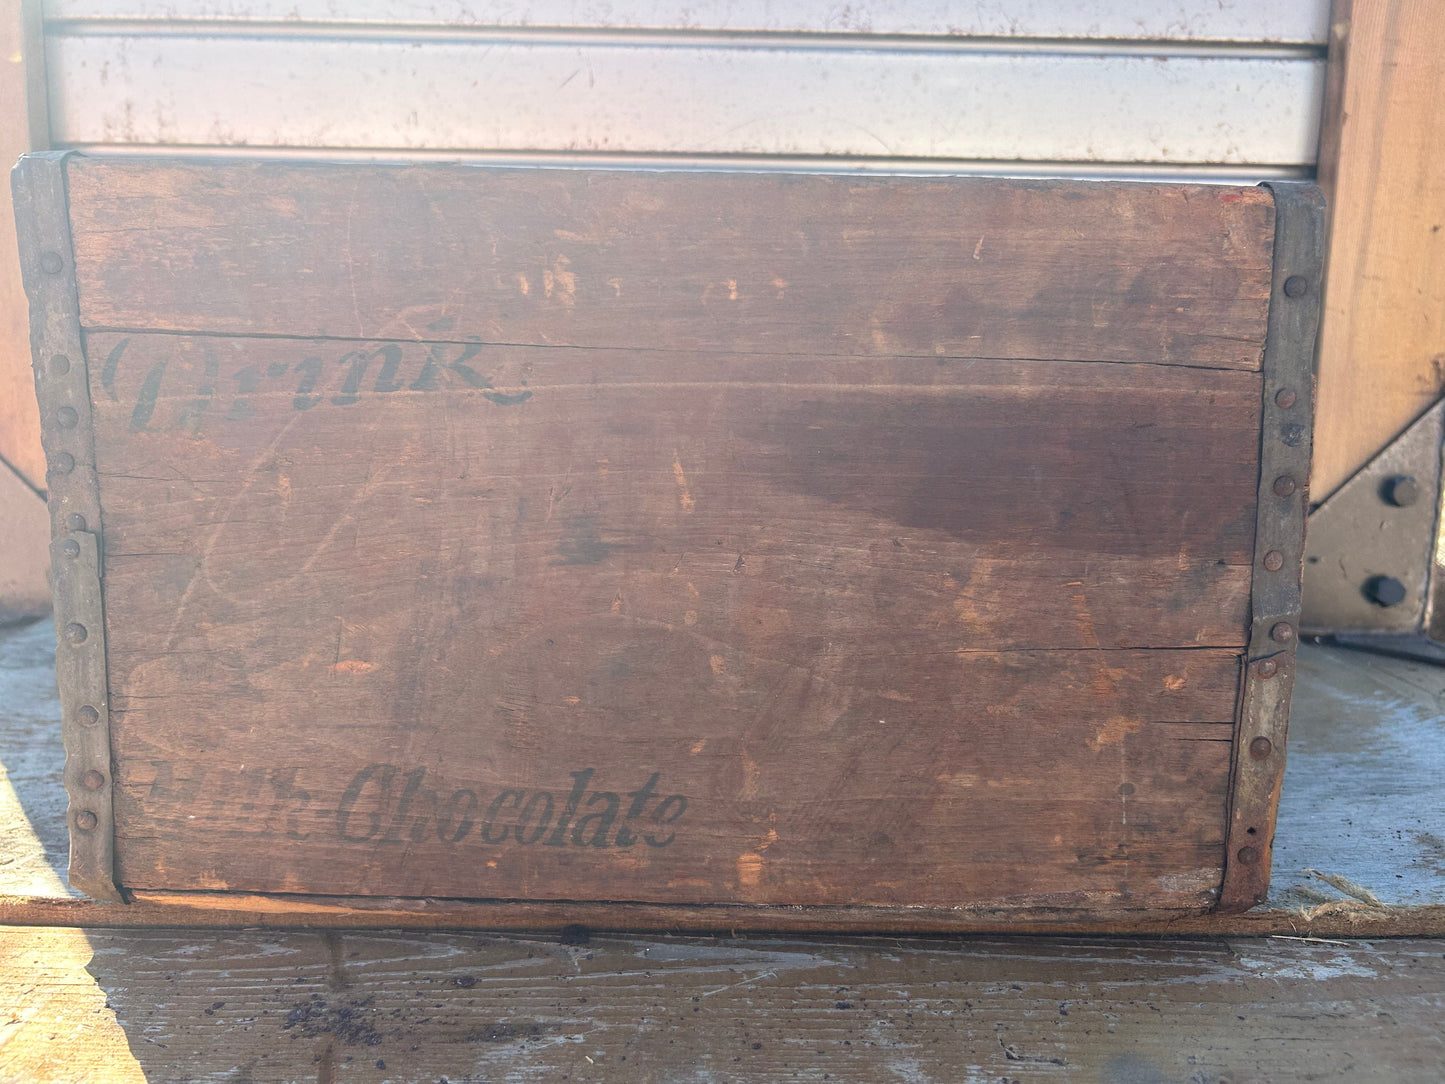 Vintage Threemor Milk Chocolate Small Bottle Wooden Crate from Brooklyn, NY - Good Condition